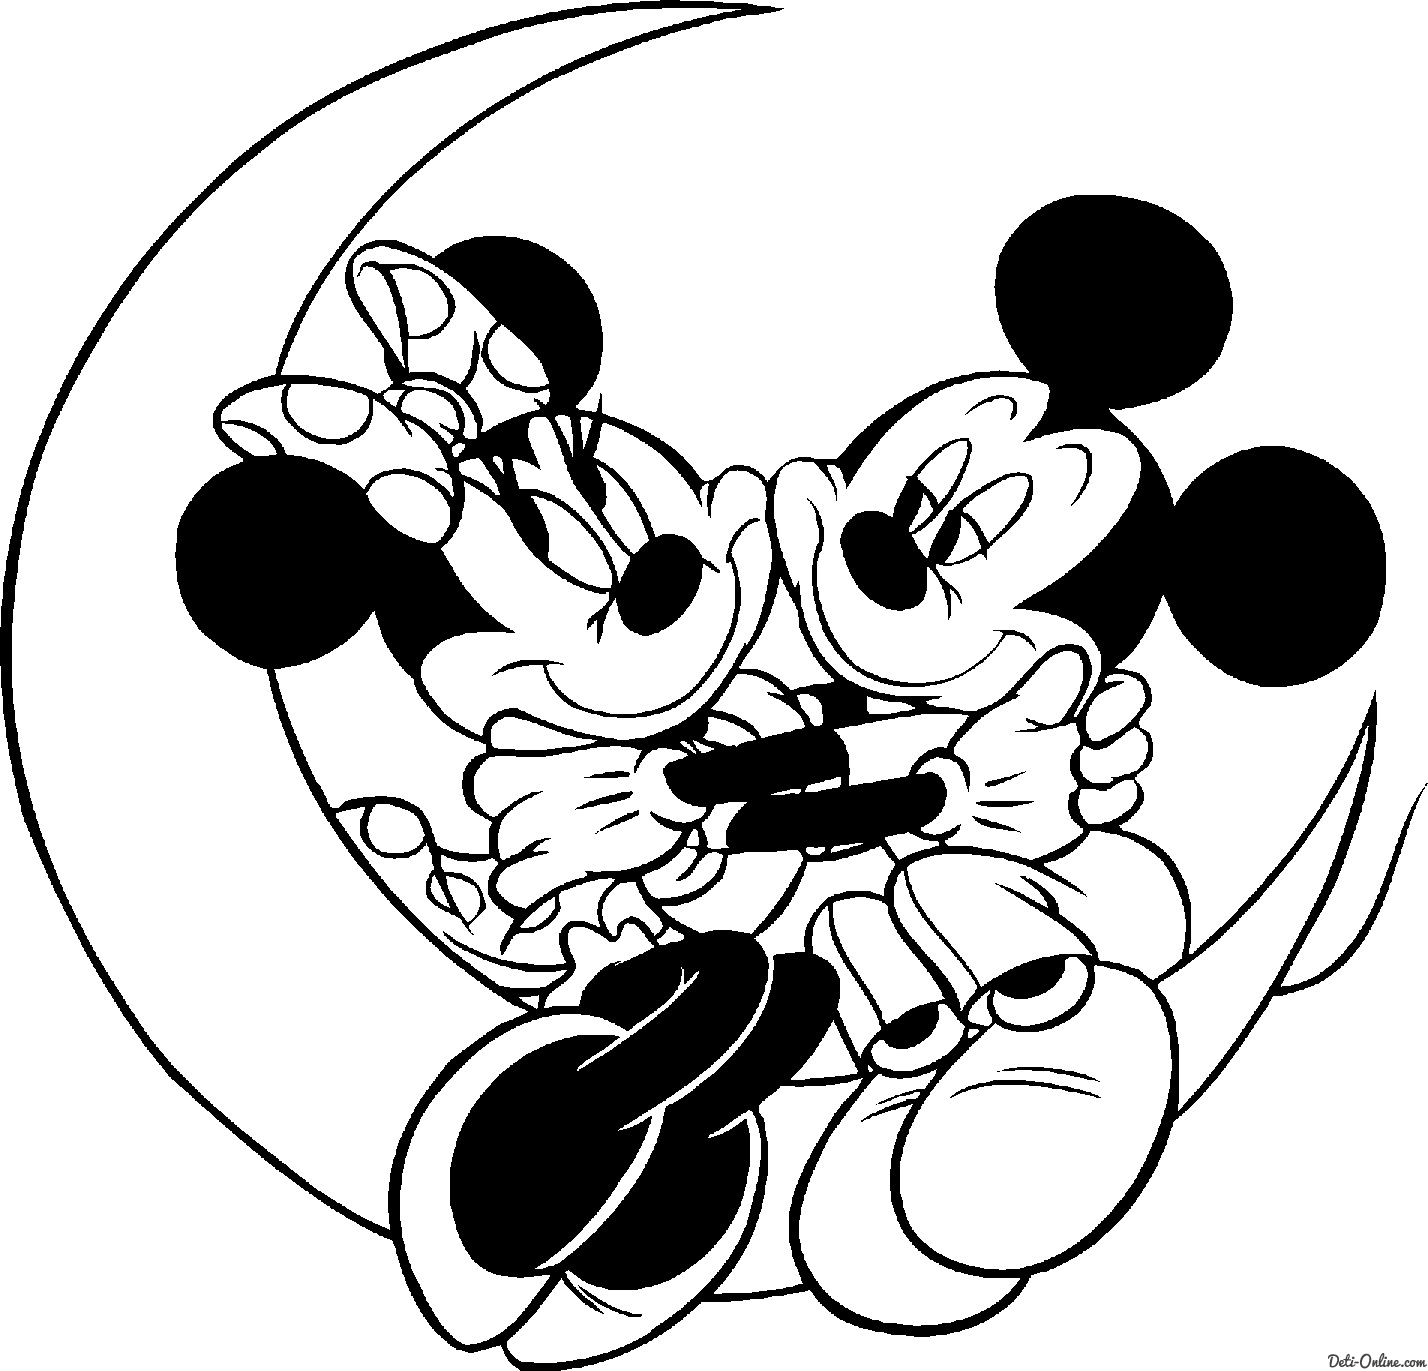 Free Mickey Mouse Black And White, Download Free Clip Art.